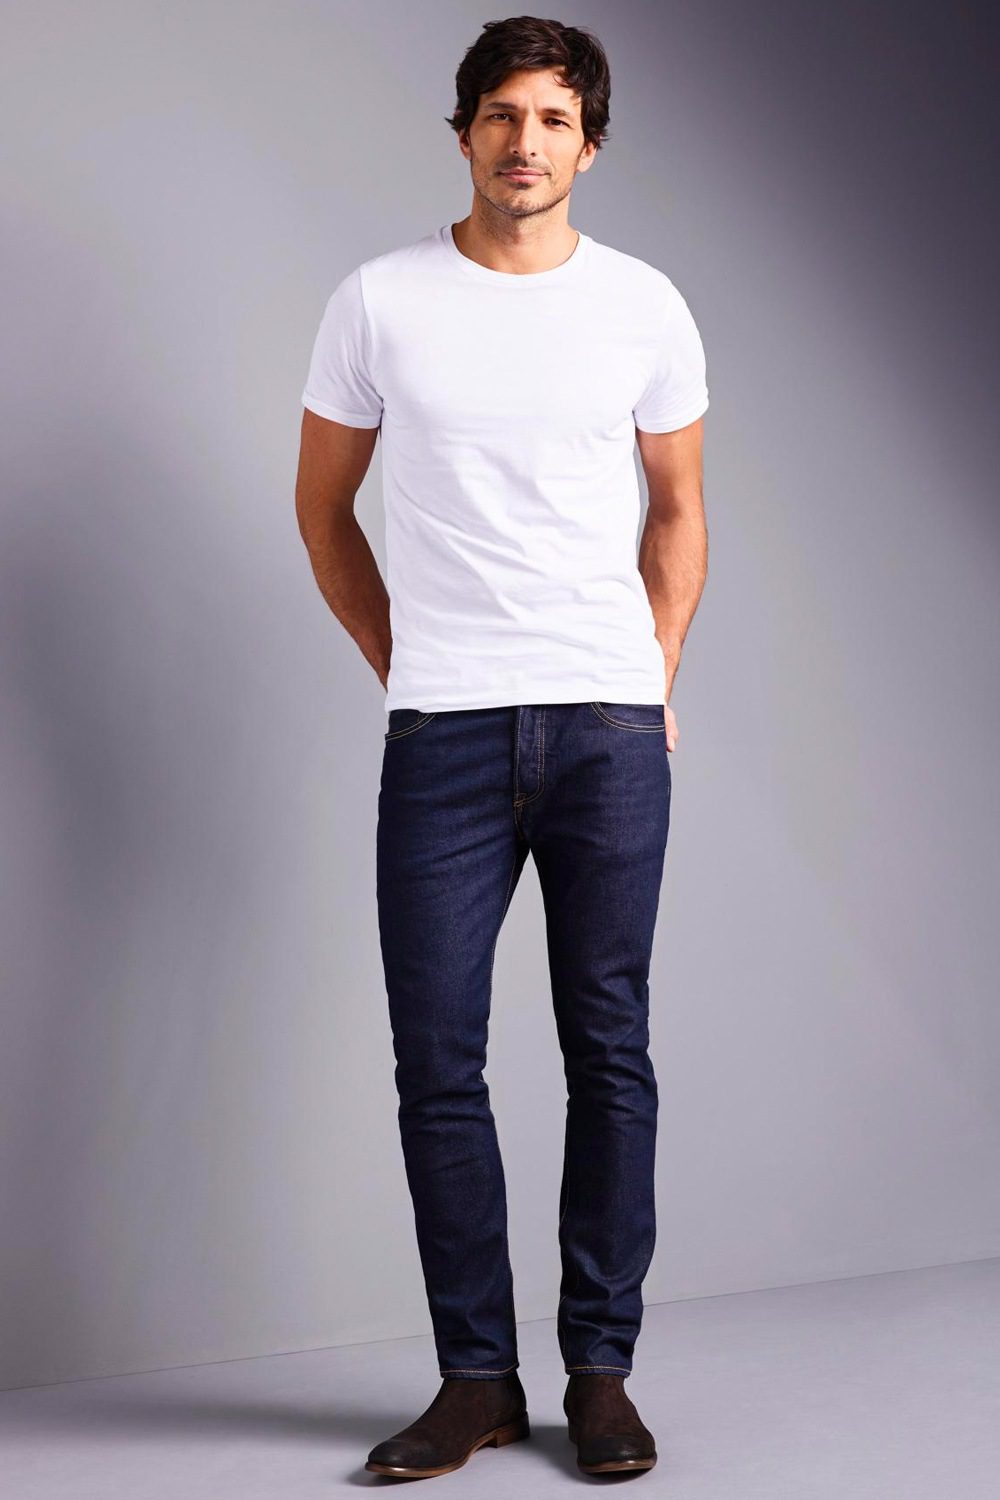 21 S Best Denim Trends For Men And How To Wear Them